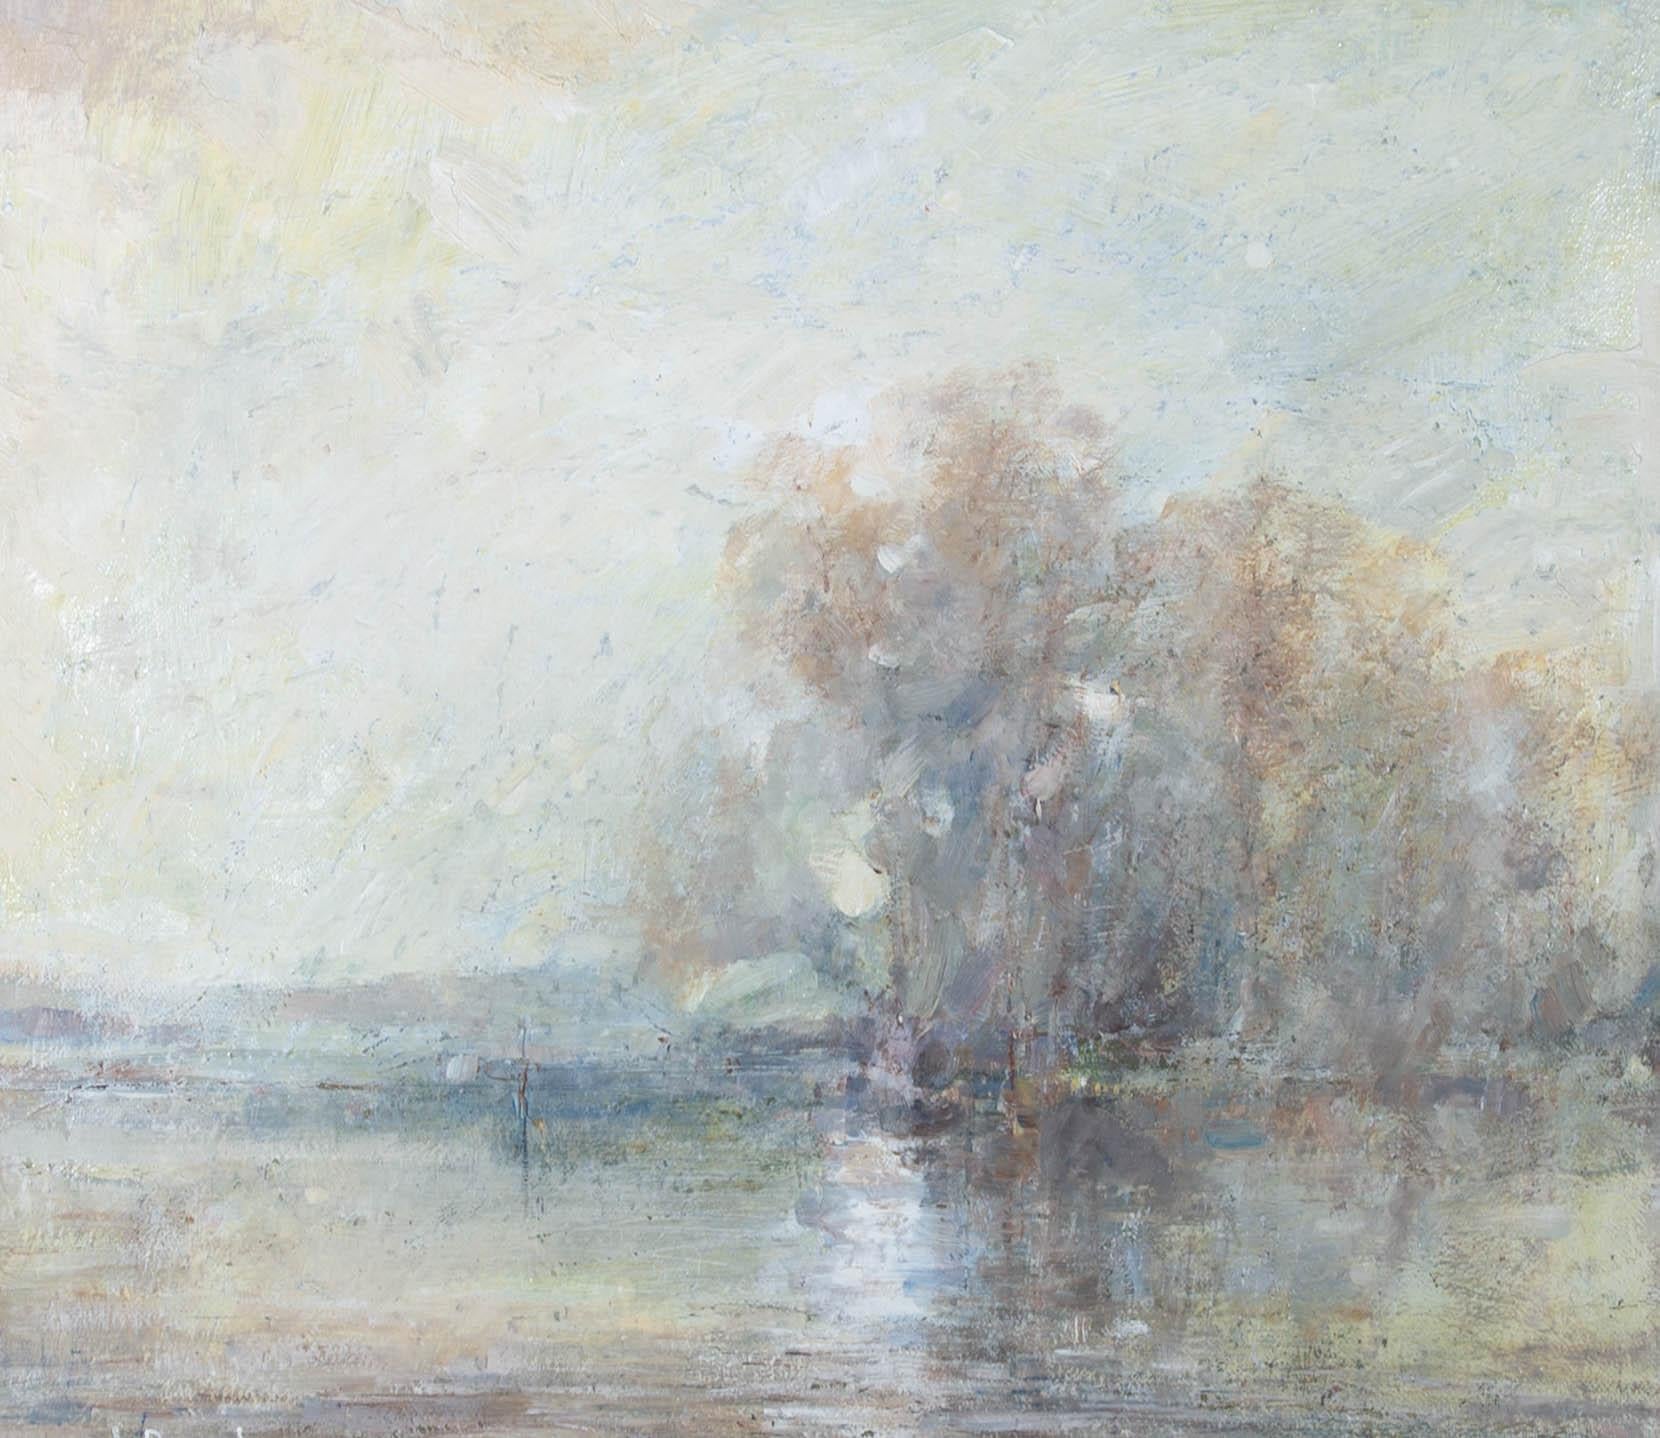 A tranquil scene depicting a willow tree on the edge of a lake. Painted in soft-hues and expressive brush strokes, the artist has captured the relaxed atmosphere of this charming landscape. On wove.
